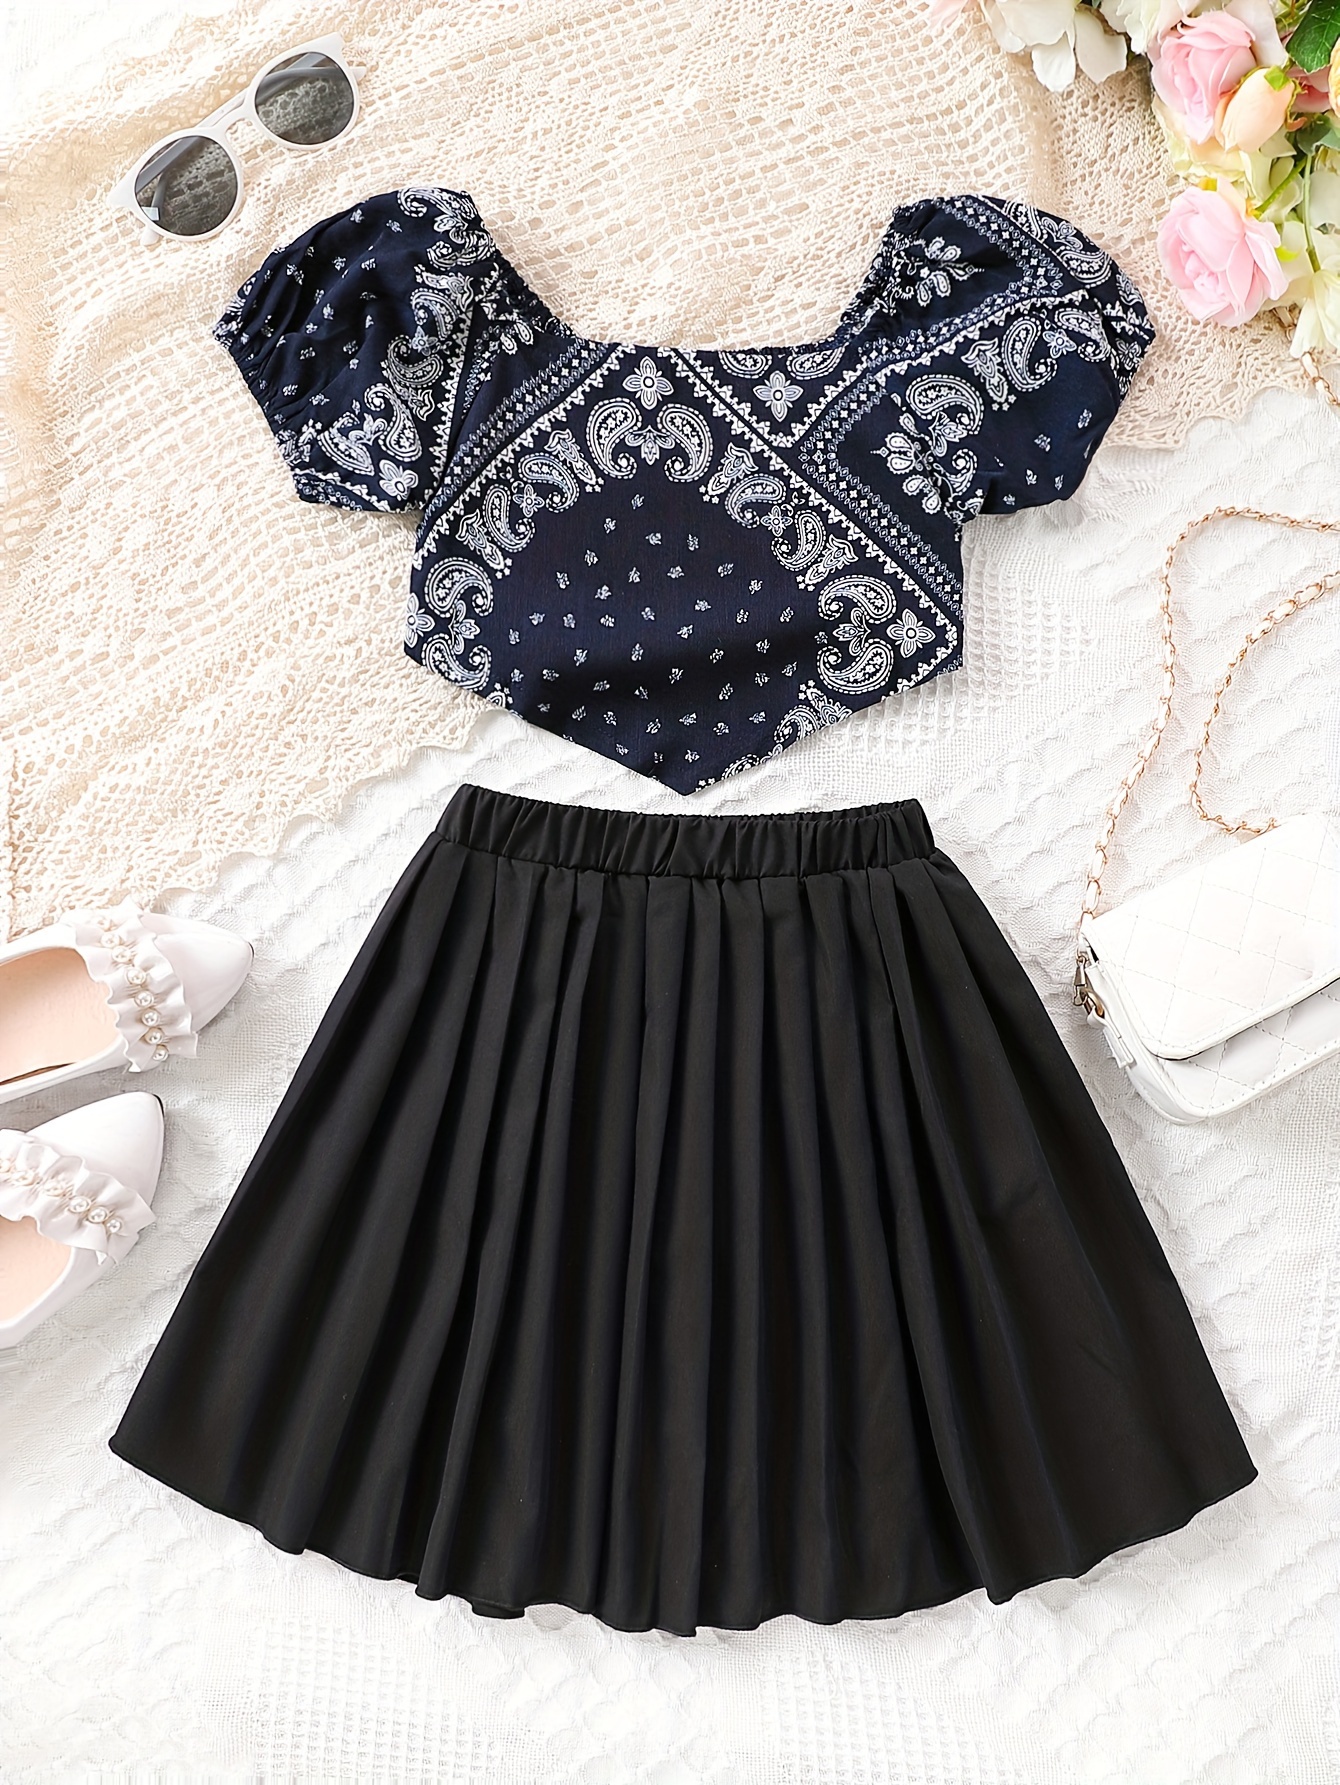 Women's Lace Two Piece Set Casual Party Short Sleeve Crop Top and Mini  Skirt Set